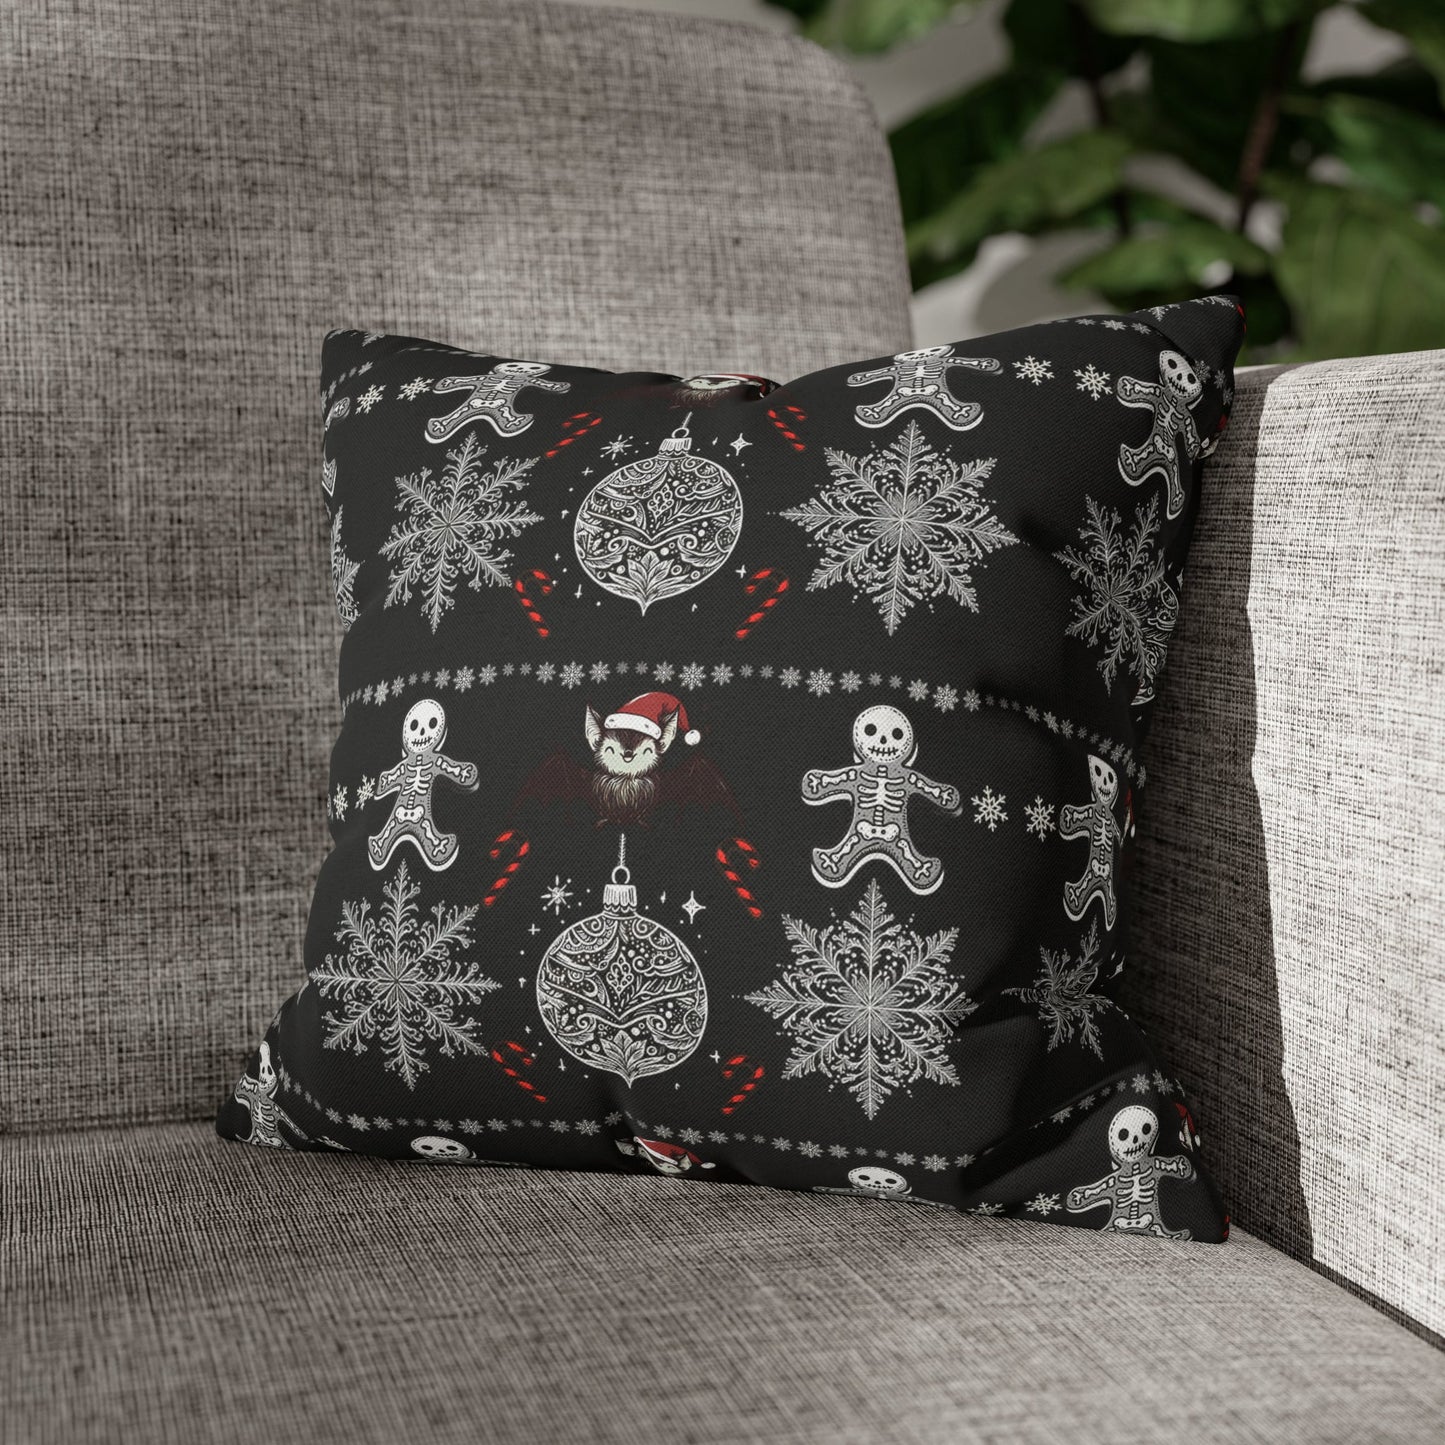 Spooky Christmas Square Pillow CaseHome DecorVTZdesigns14" × 14"All Over PrintAOPbats